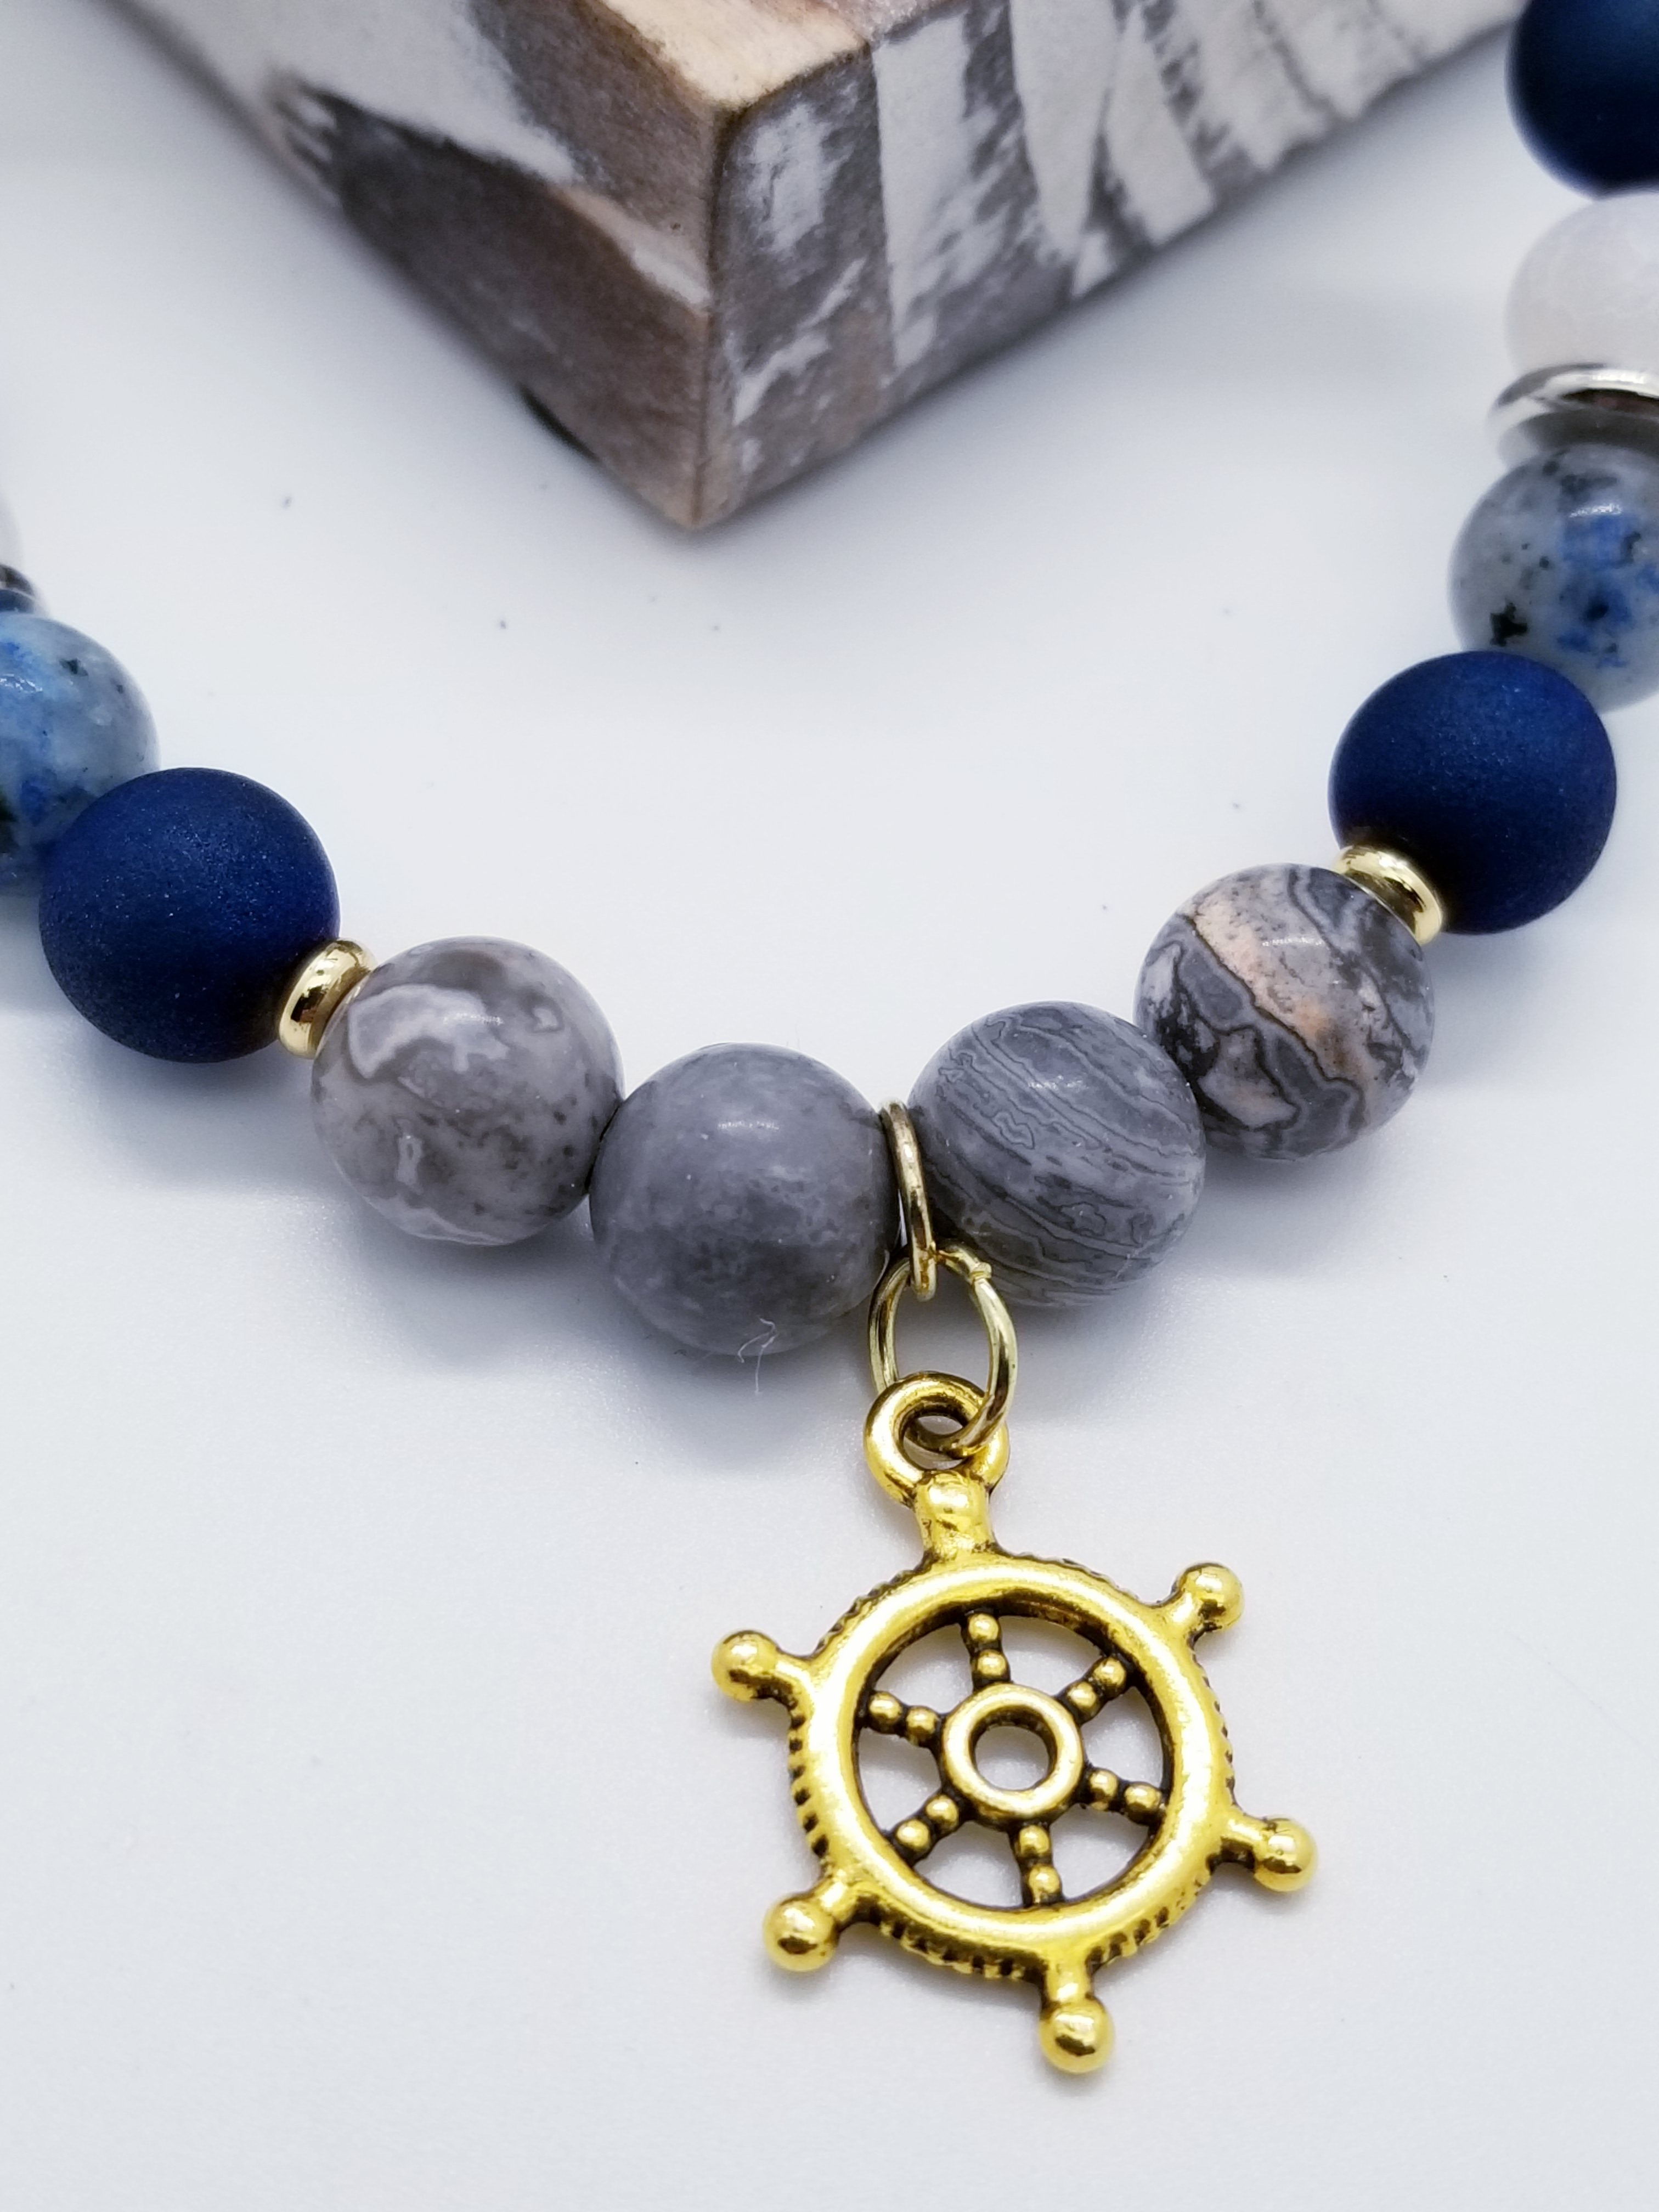 Honor, Respect, and Duty (US Coast Guard core values) inspired bracelet to honor our troops, veterans, and the families that support them! Ship wheel charm with white turquoise beads, grey marbled glass beads, sky blue glass beads, cracked blue and white beads, and gold spacers. 